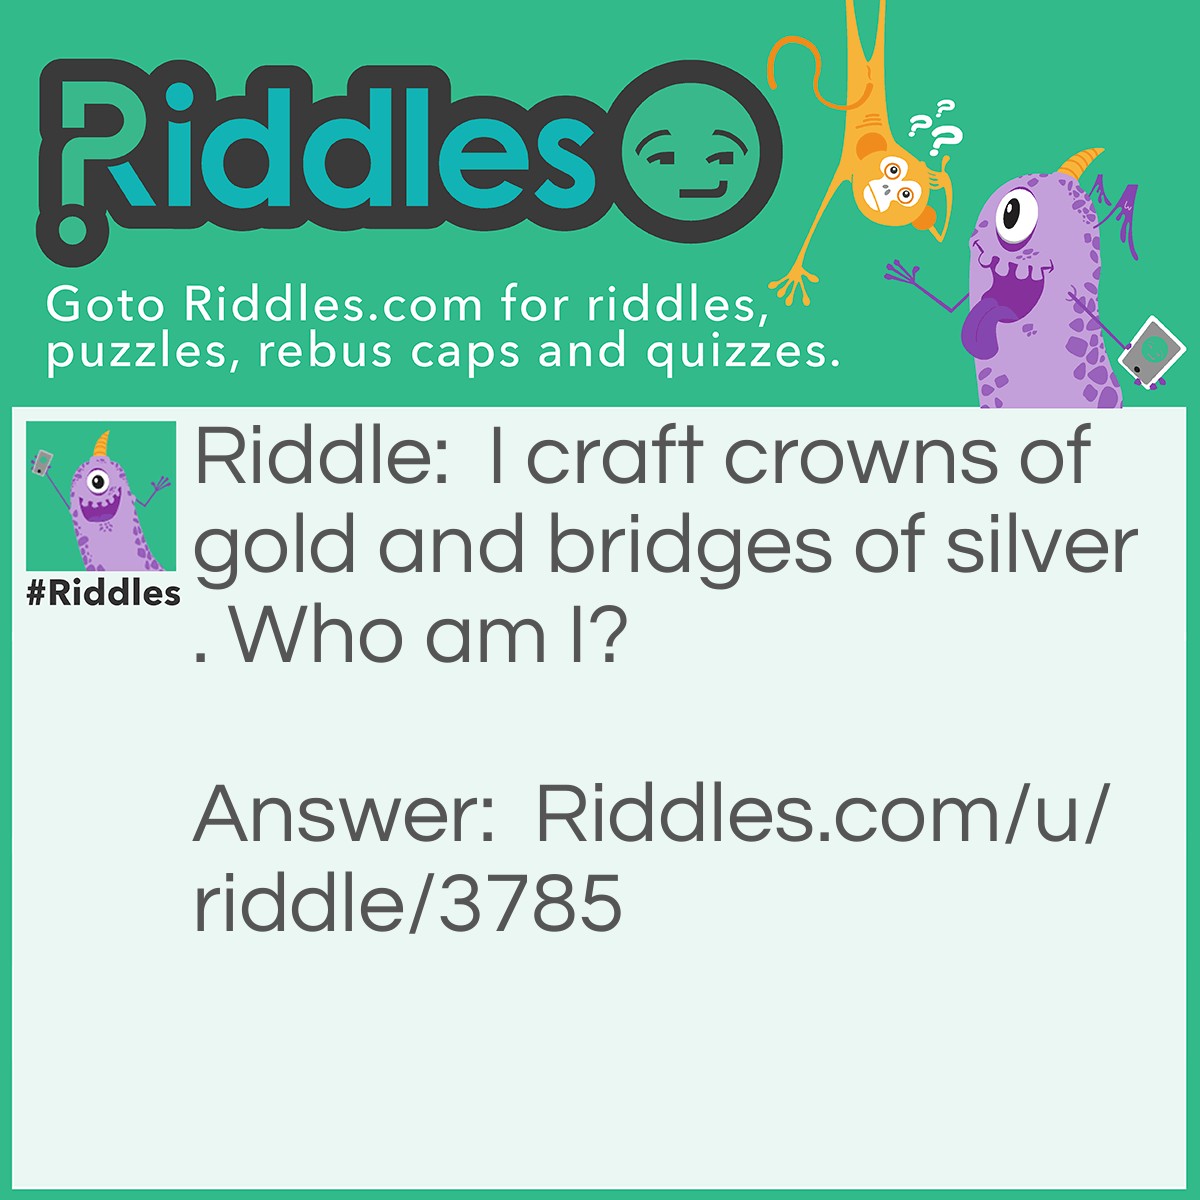 Riddle: I craft crowns of gold and bridges of silver. Who am I? Answer: A dentist!